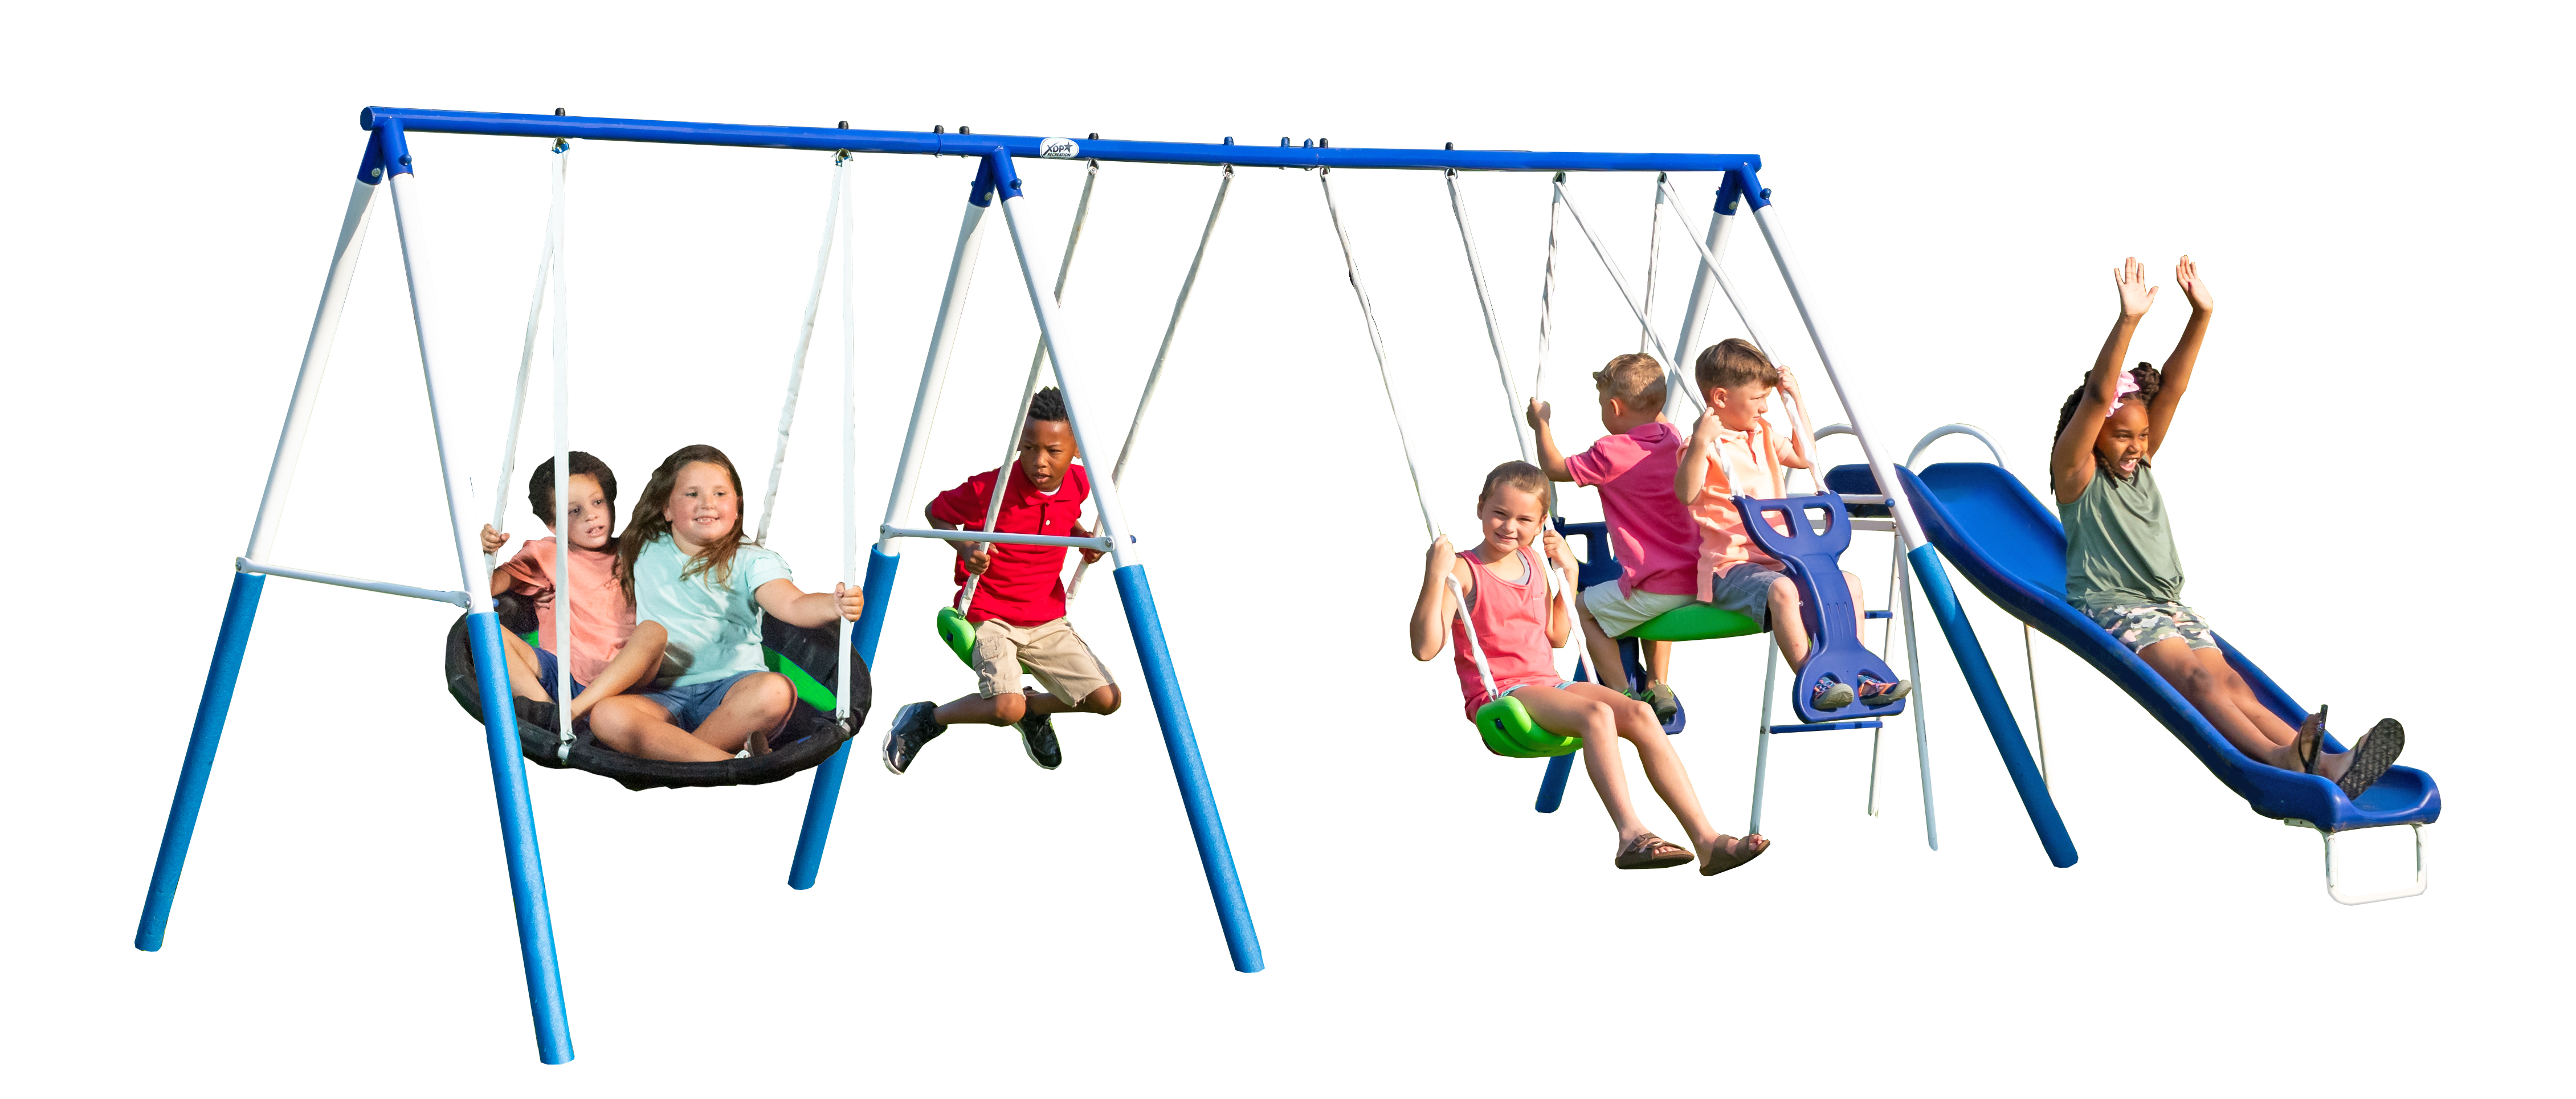 XDP Recreation All Star Playground Metal Swing Set for up to 7 Children - image 4 of 13